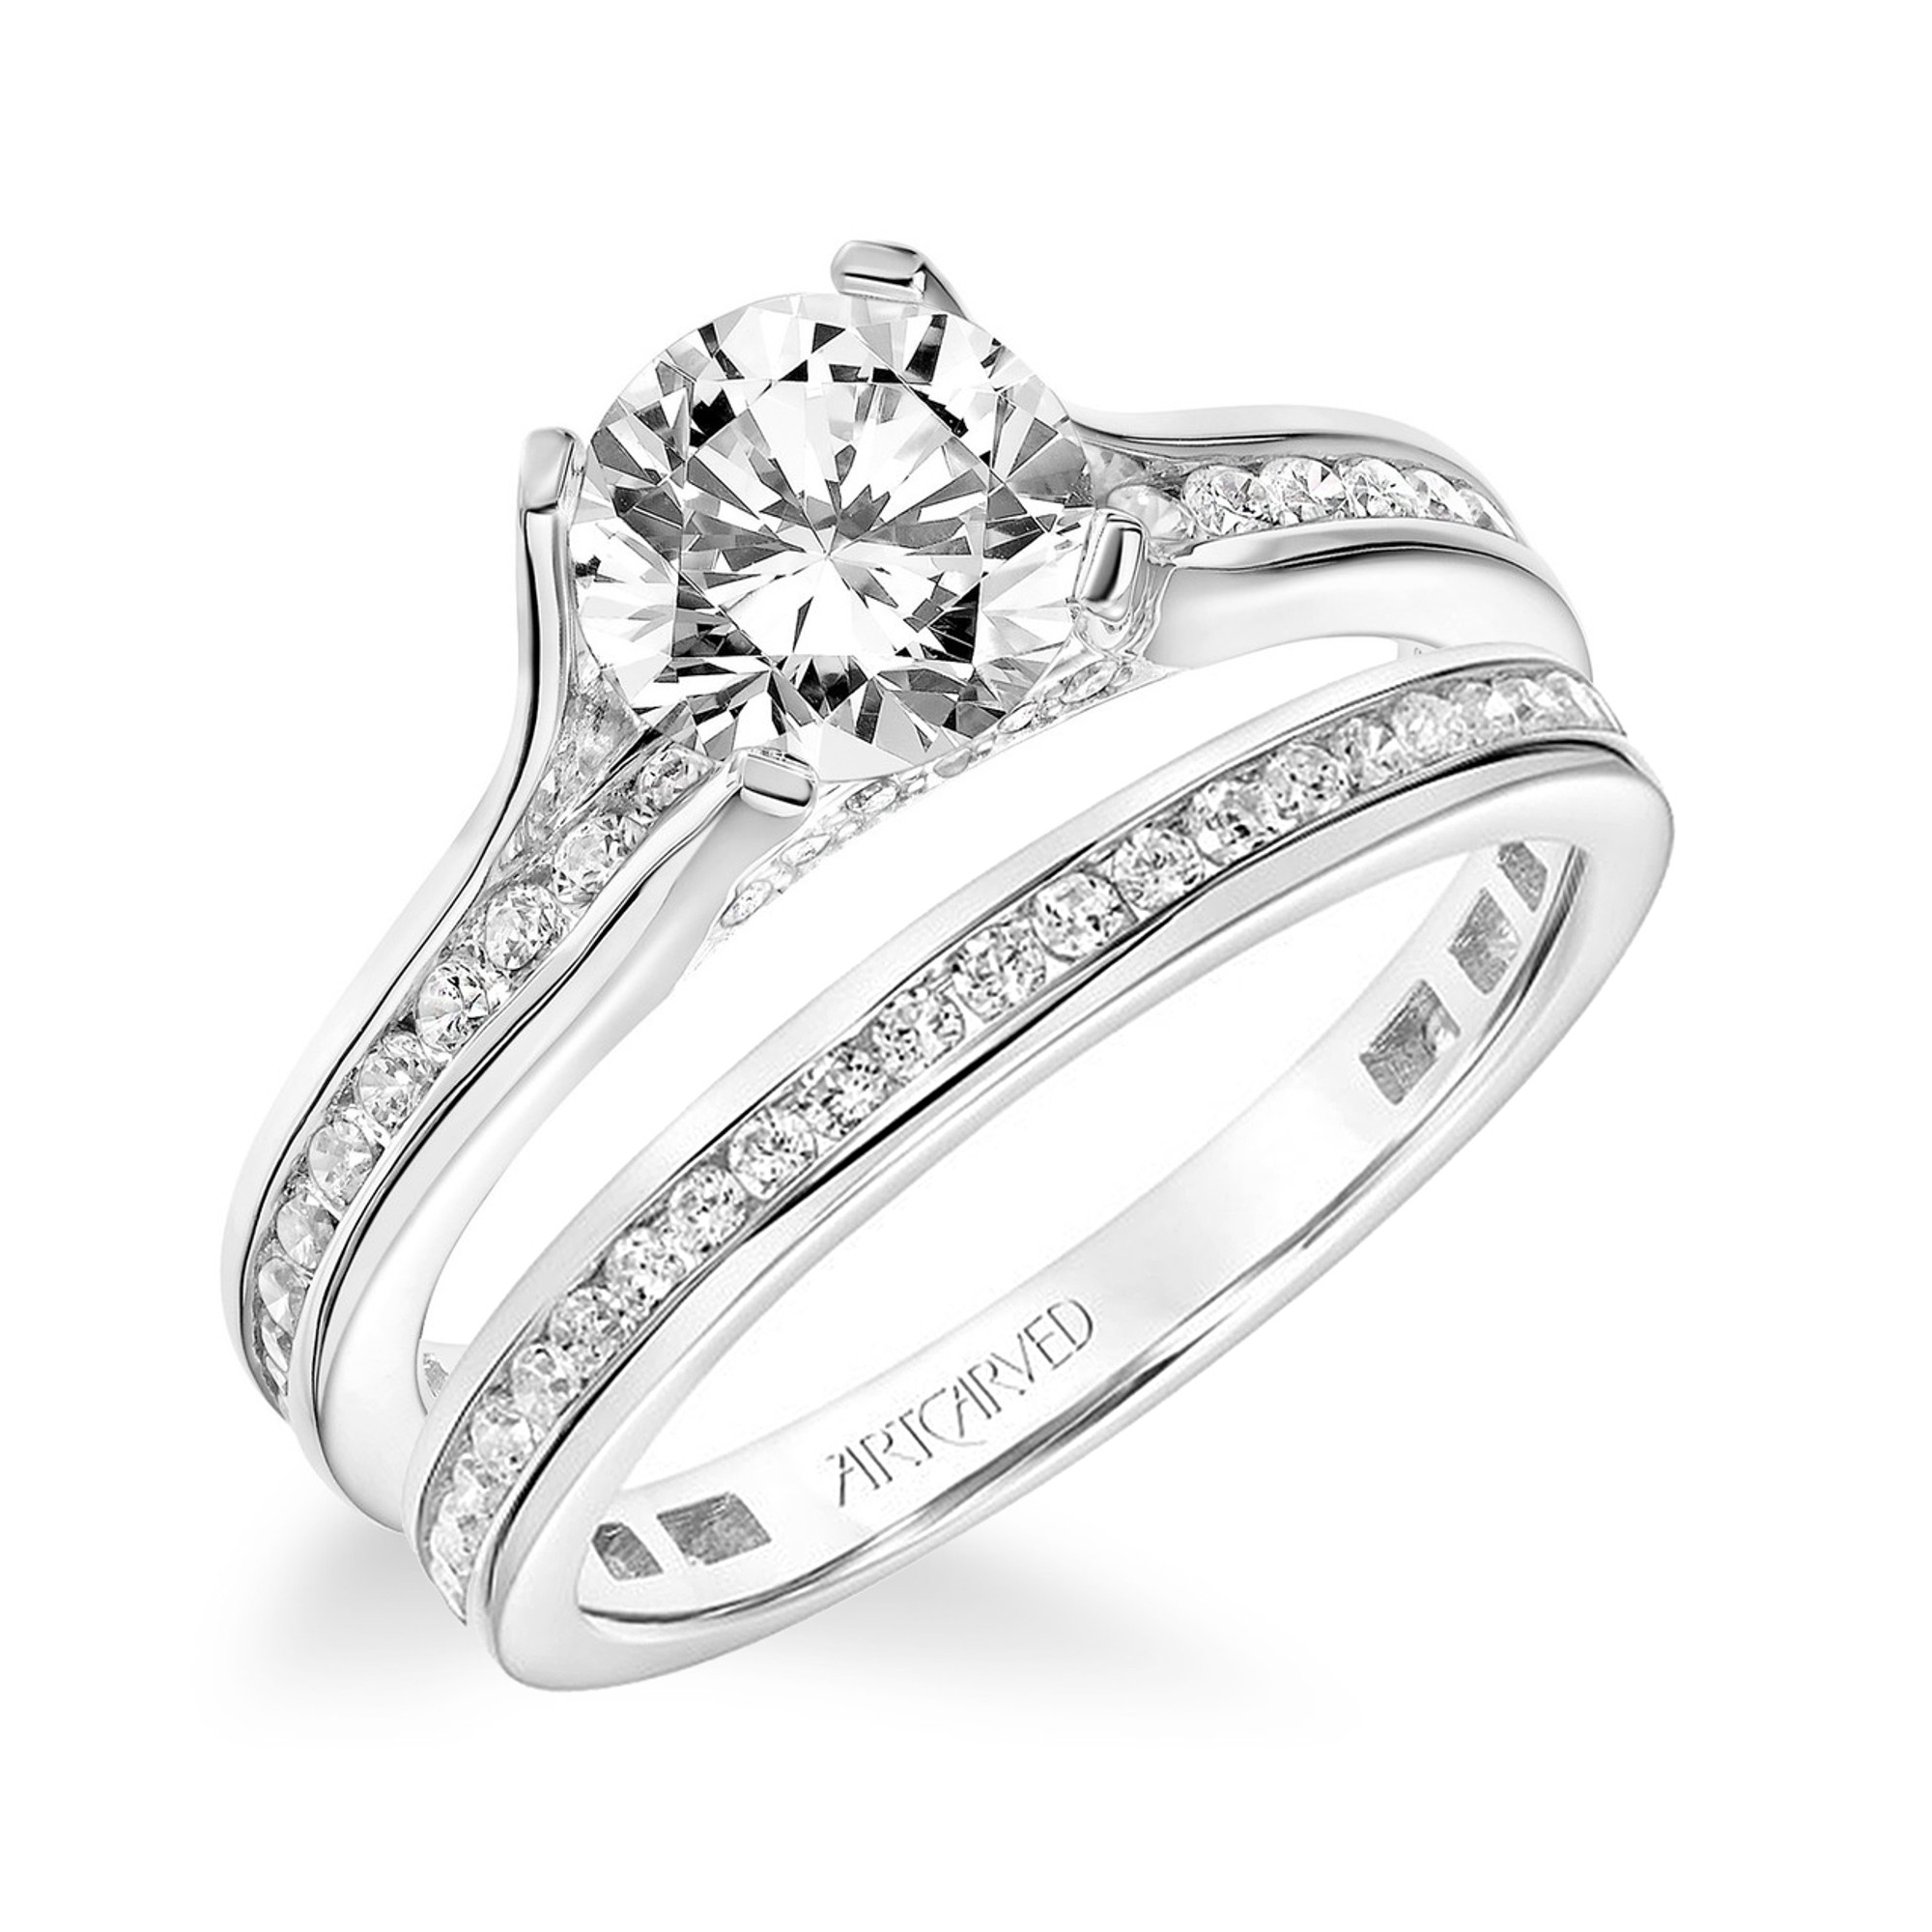 14kt White Gold Channel Set Diamond Engagement Ring & Band by ArtCarved